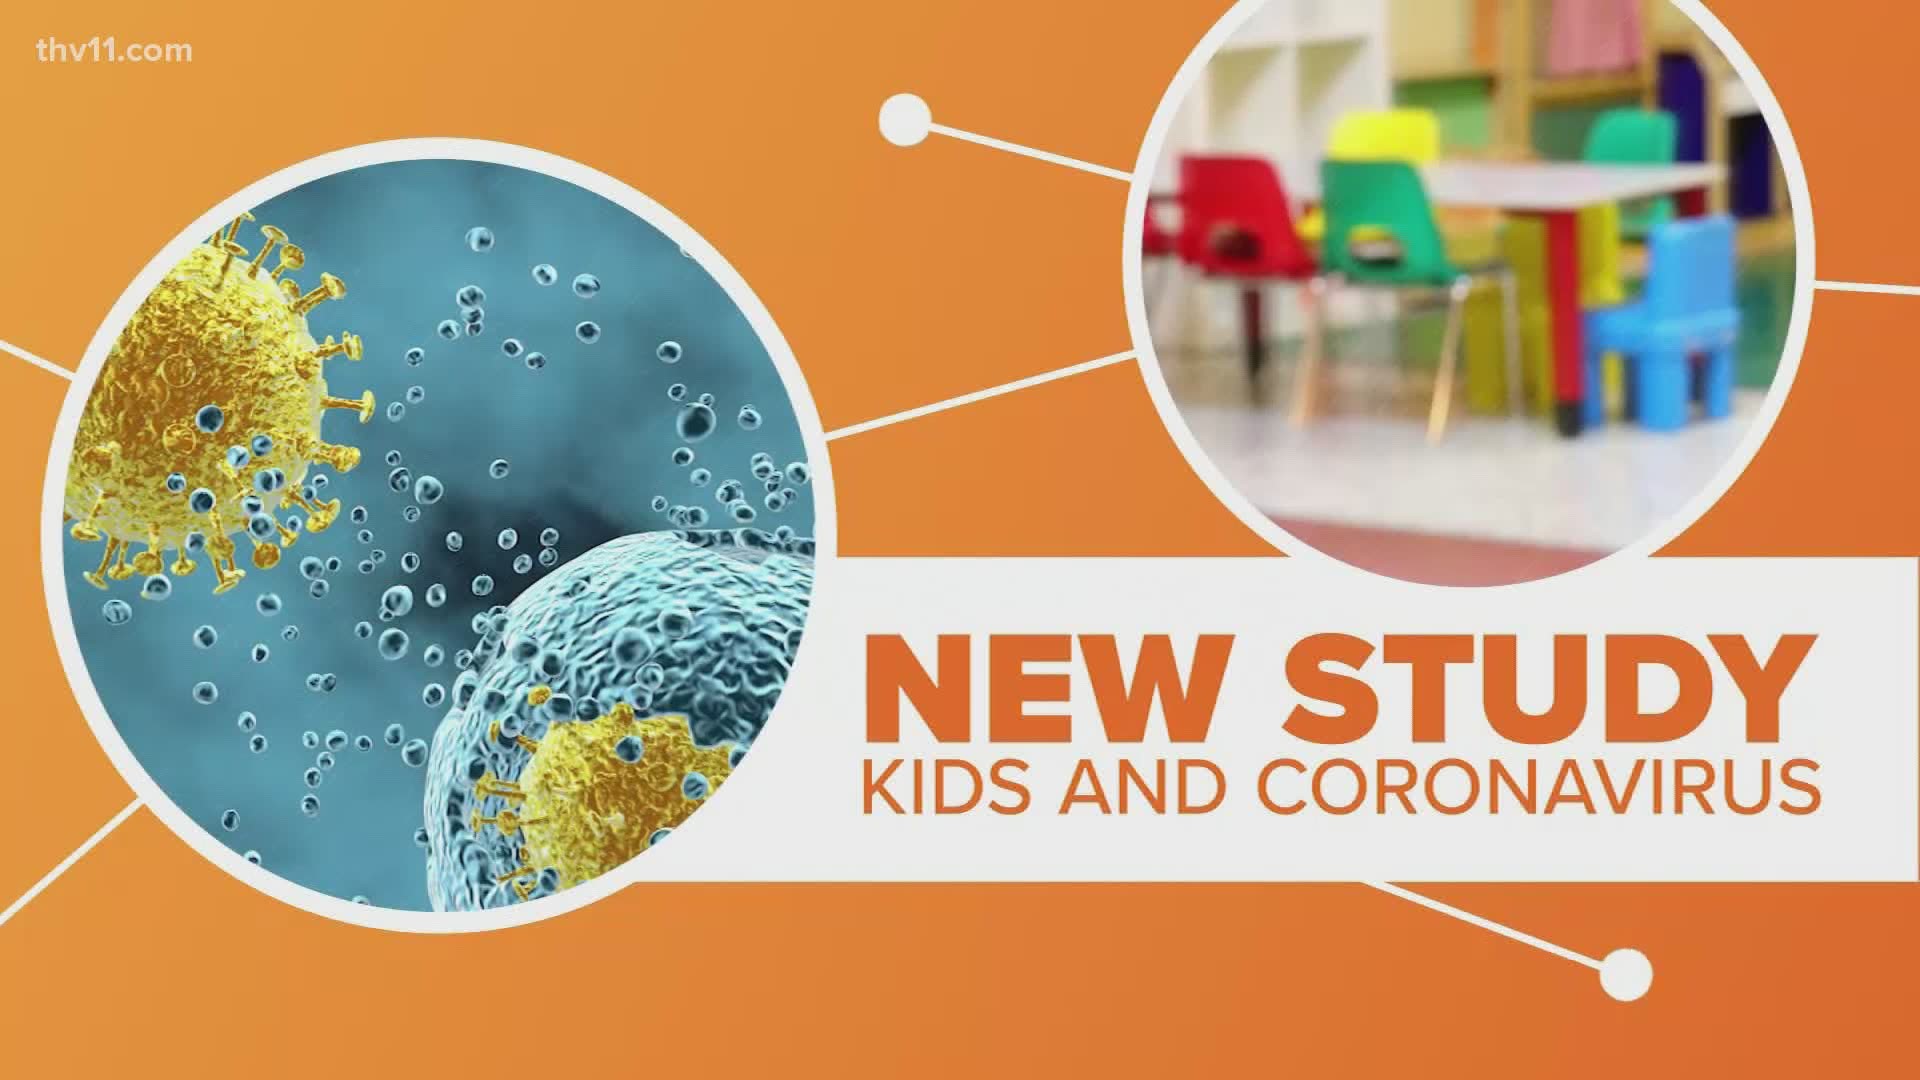 New research from the CDC is out, looking into the link between COVID-19 and daycare-aged children.